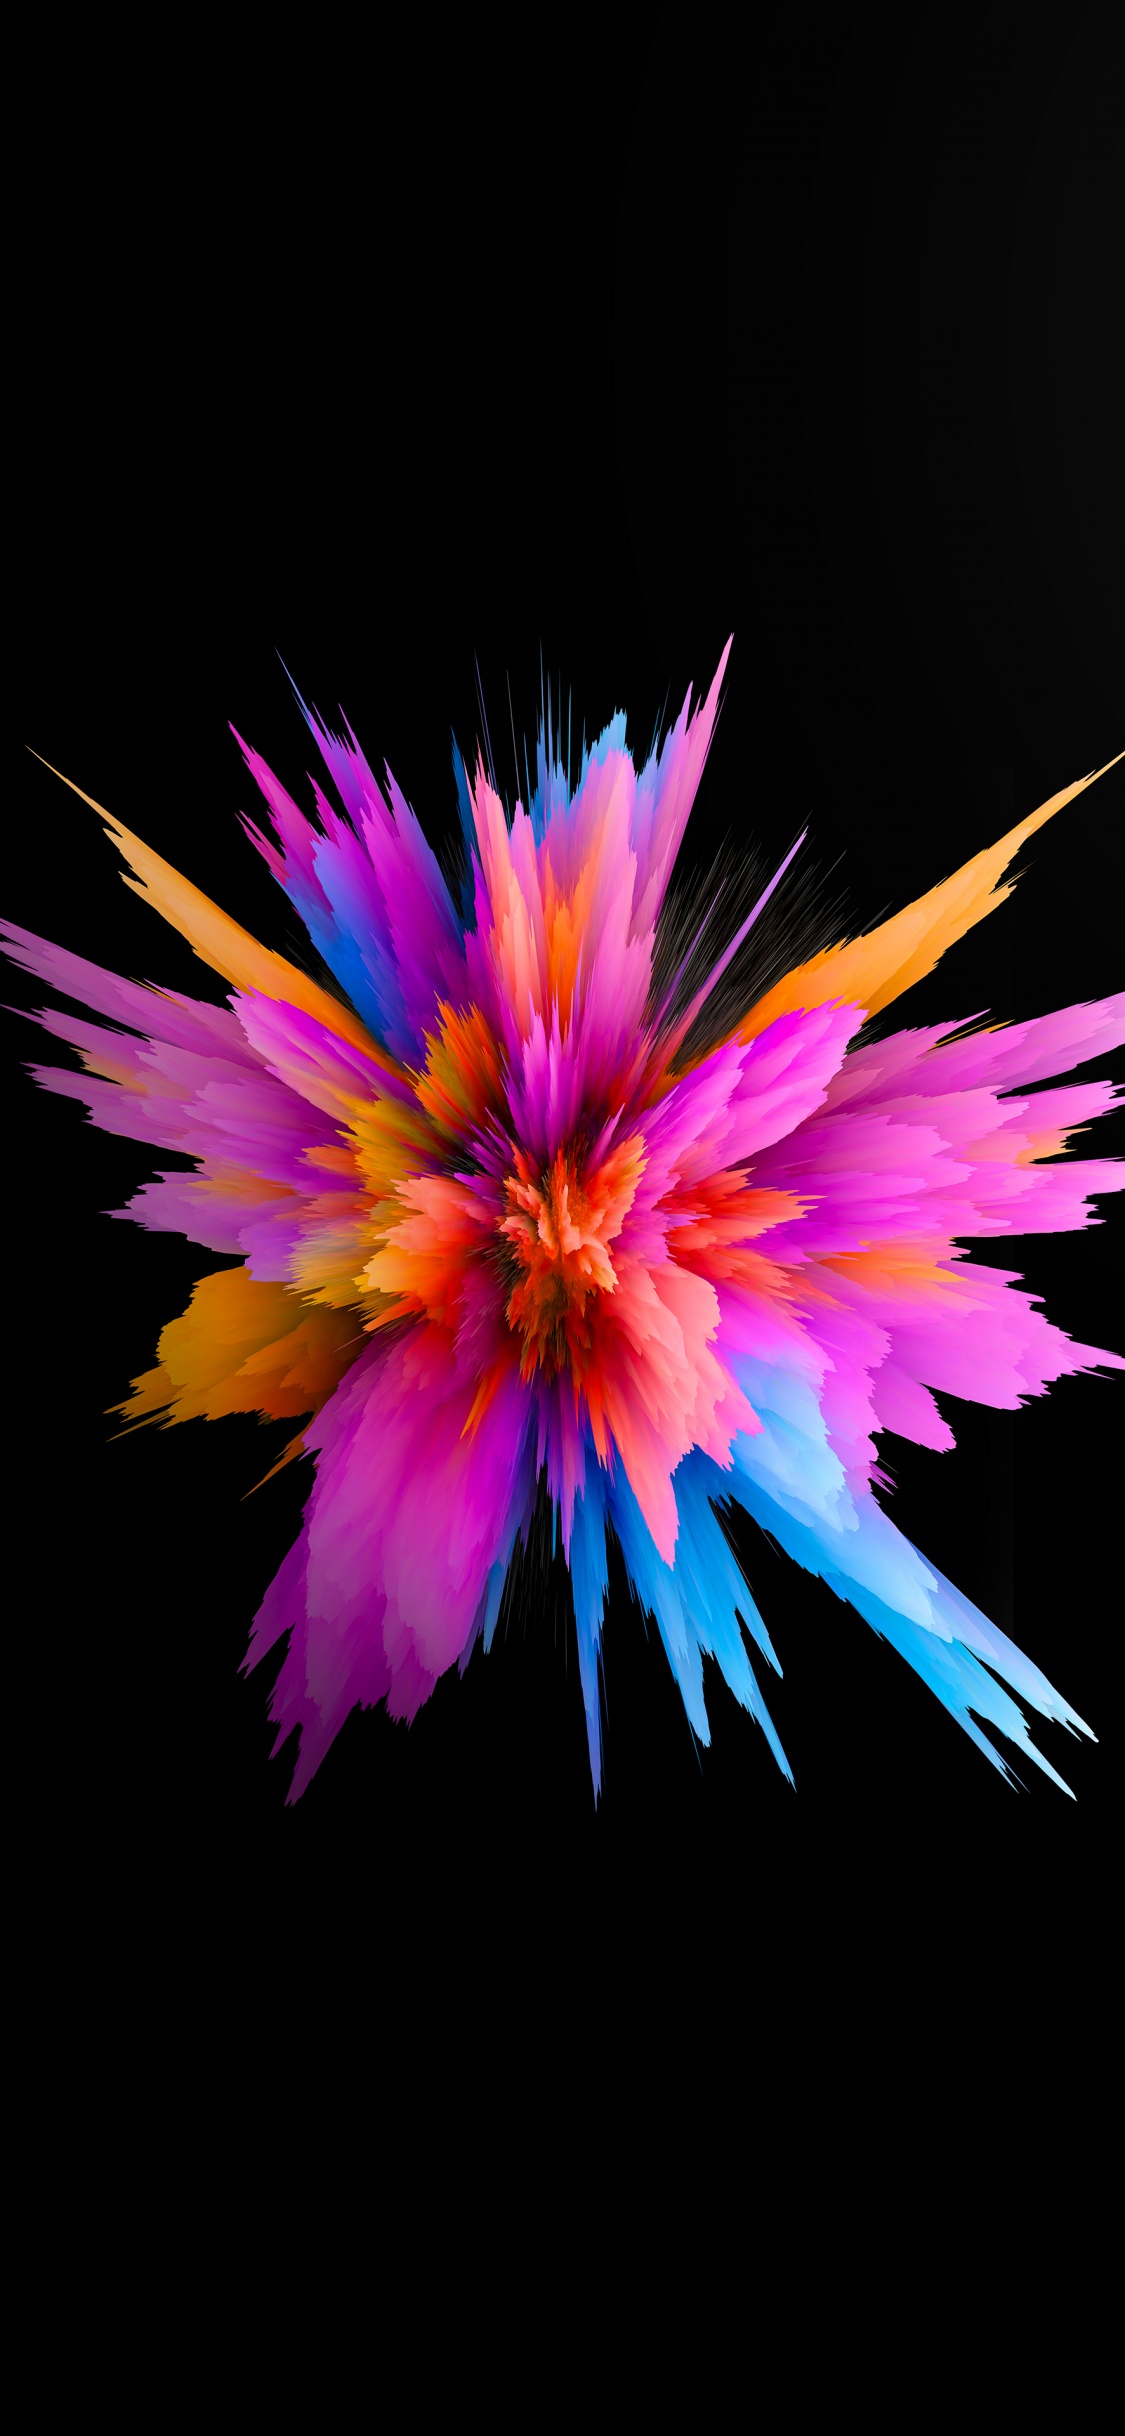 Color burst Wallpaper 4K, Colorful, Explosion, Abstract, #6652